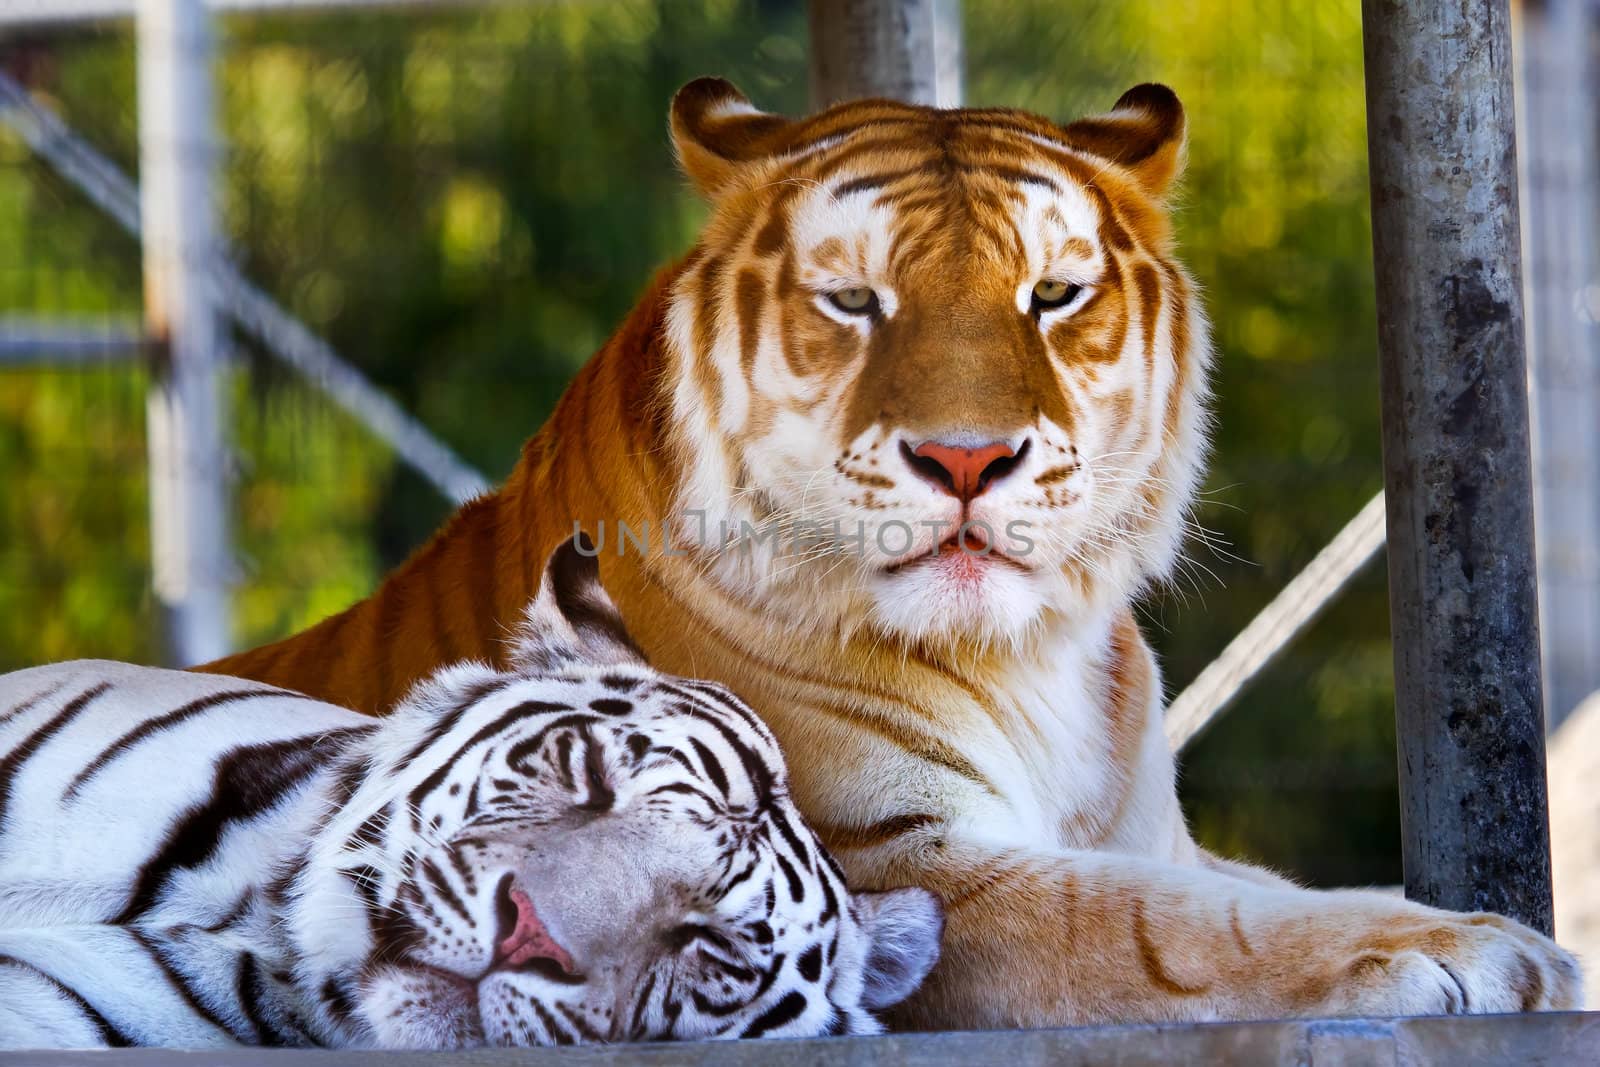 Buddies Royal White Orange Black Bengal Tigers Resting Together by bill_perry